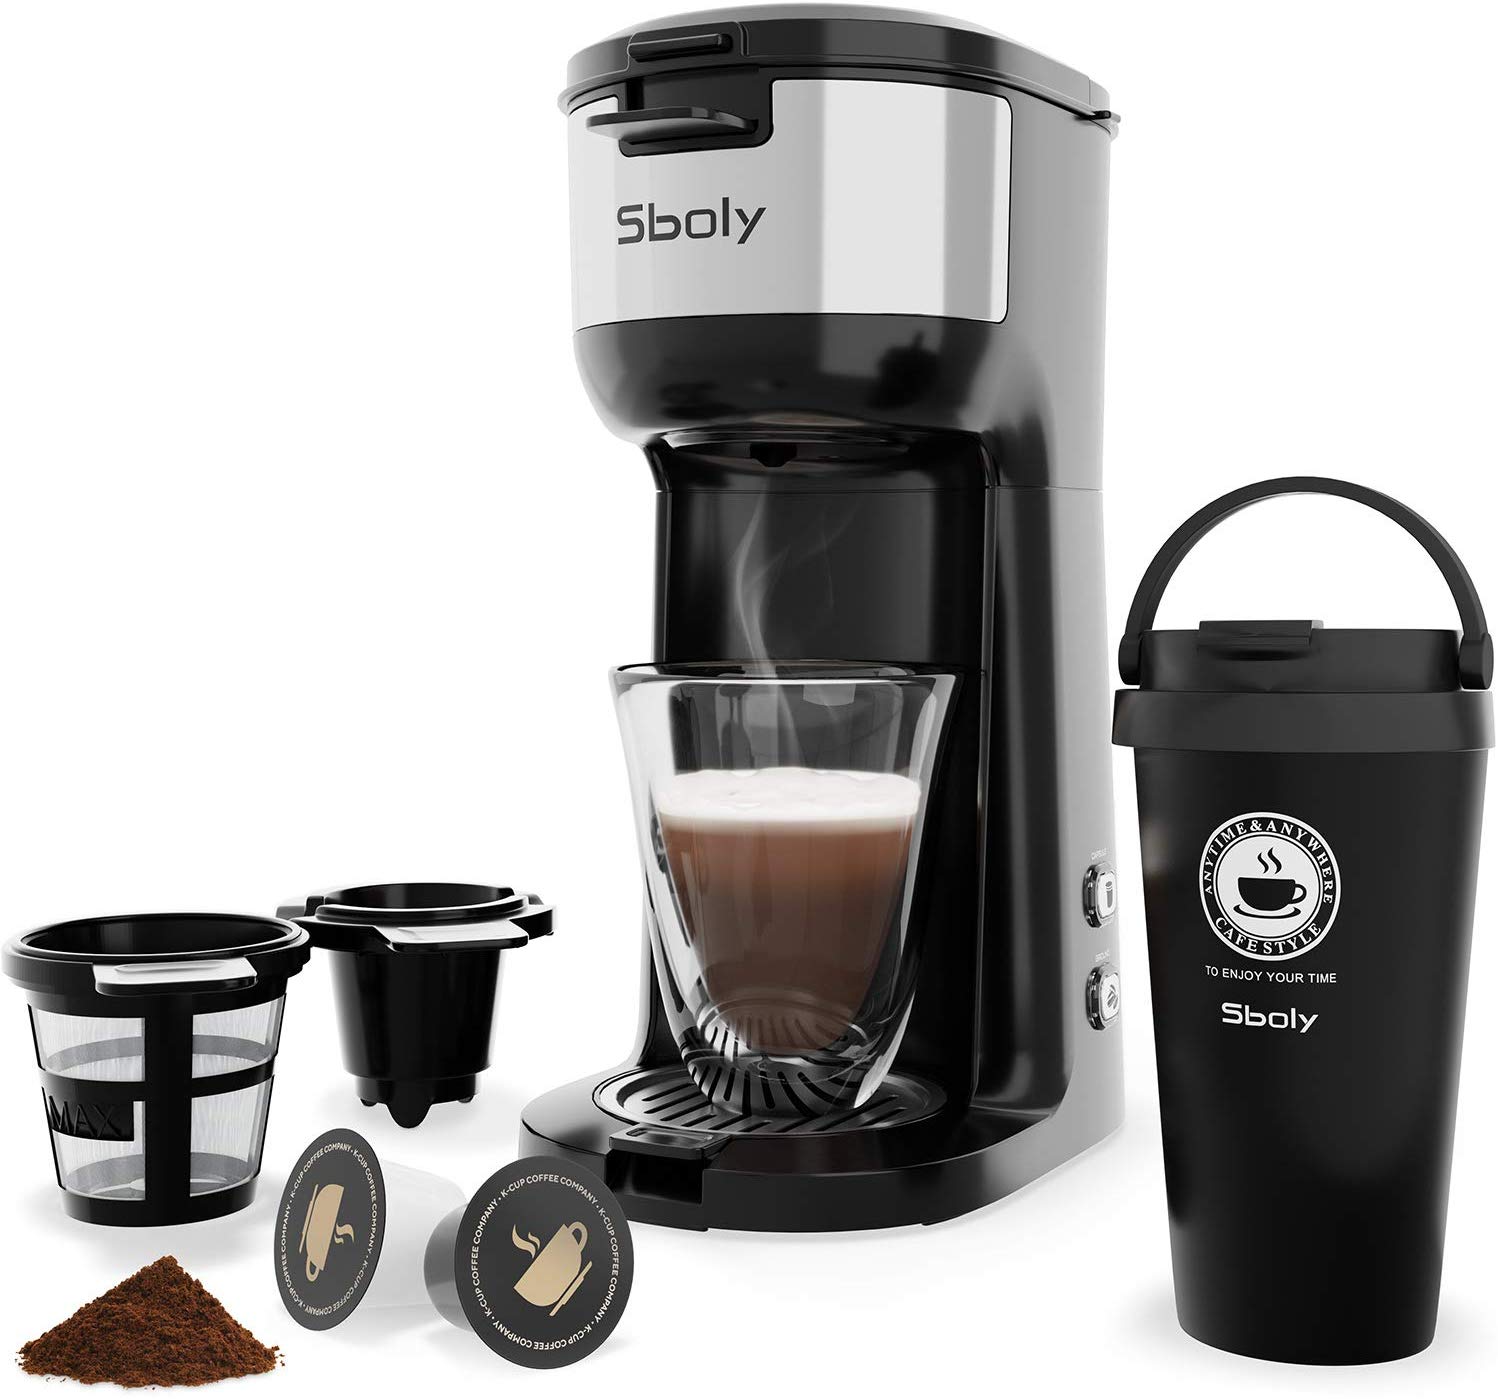 Sboly Self Cleaning Coffee Maker 1